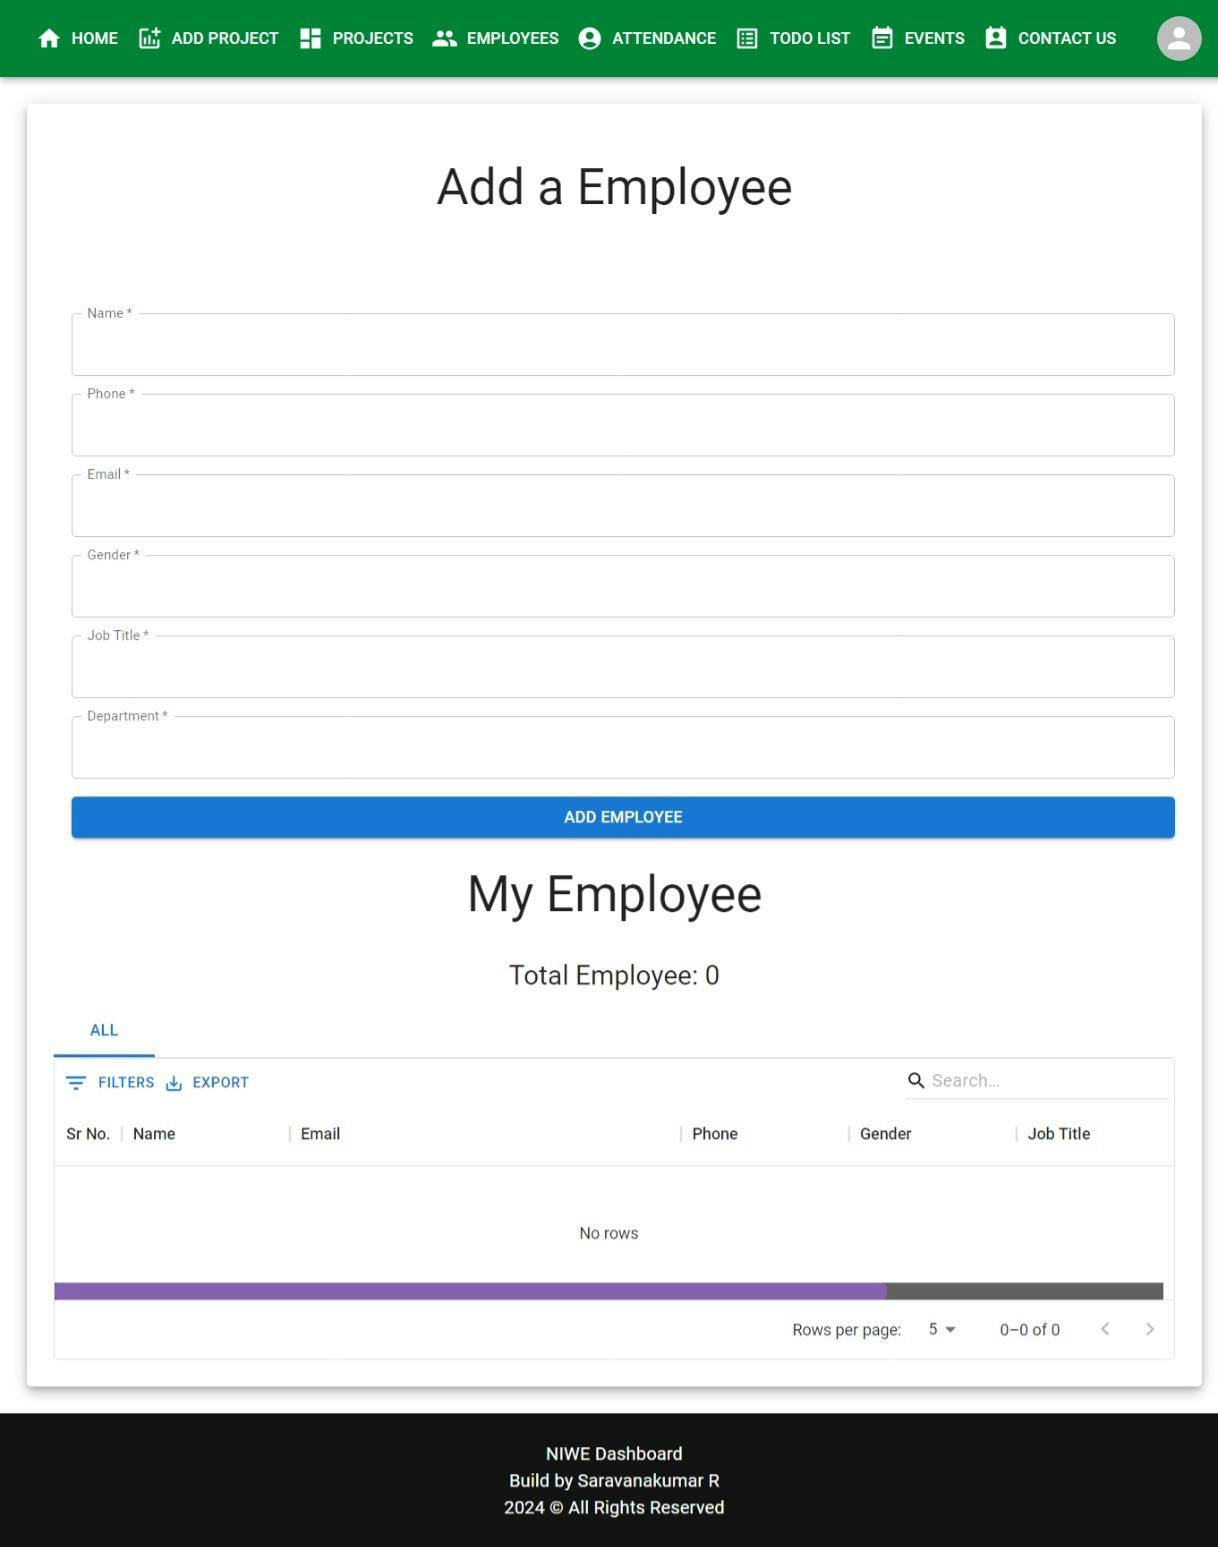 Add/View Employees